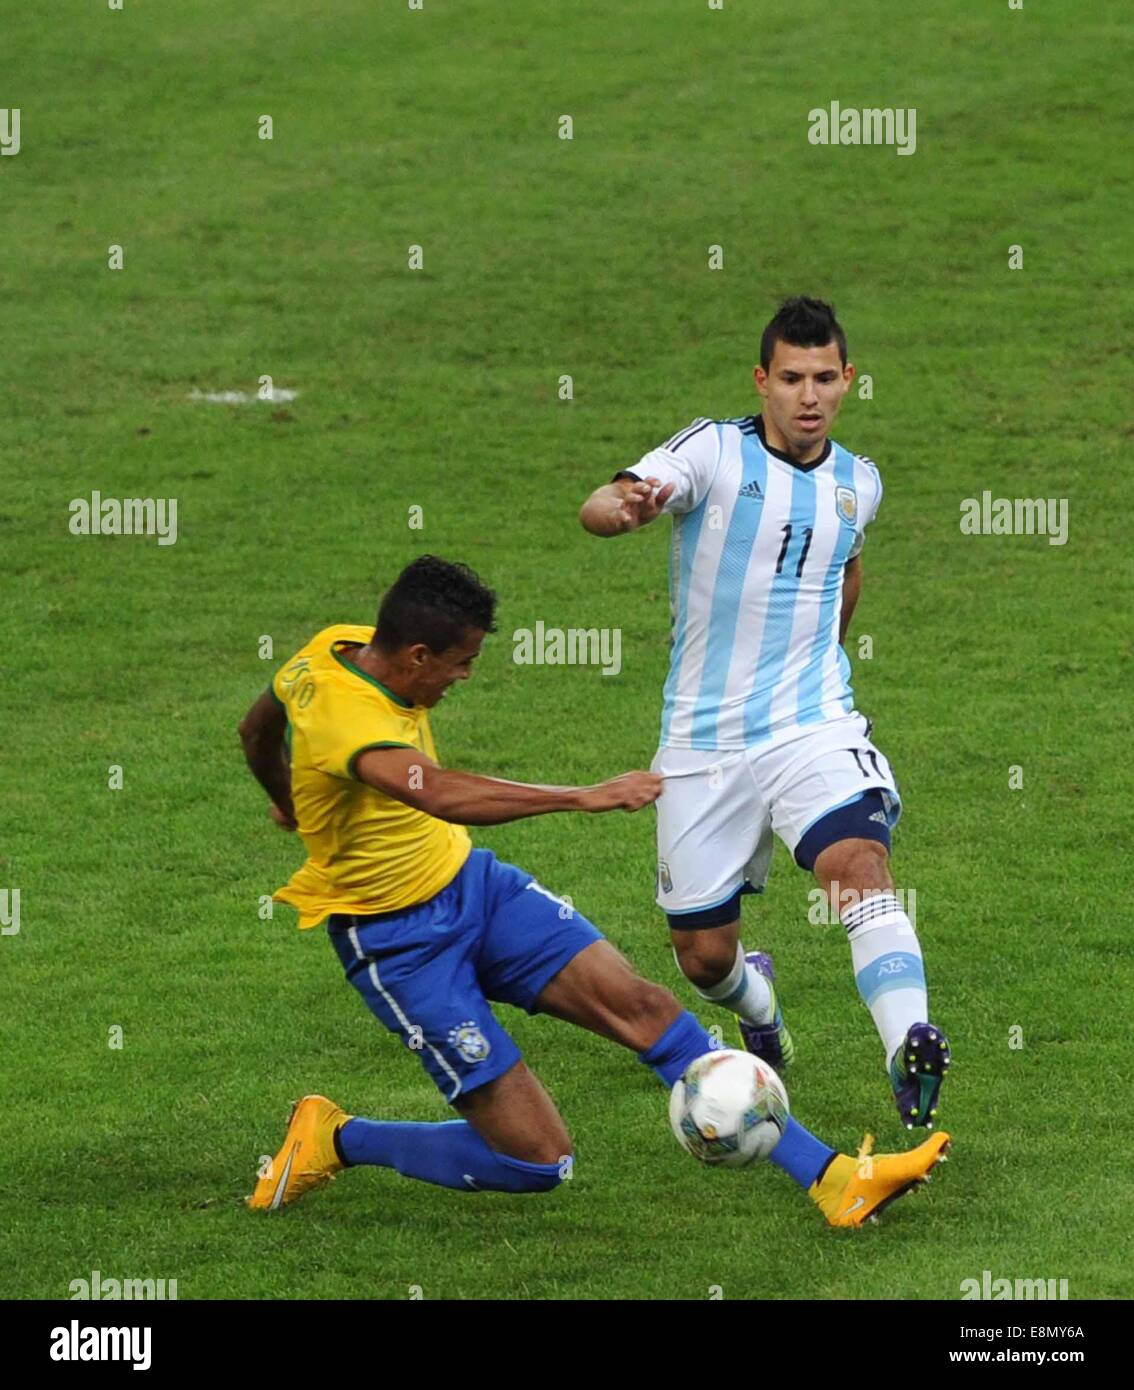 Beijing, China. 11th Oct, 2014. Argentina's Sergio Aguero (R) vies for the ball during a friendly match against Brazil in Beijing, capital of China, Oct. 11, 2014. Credit:  Gong Lei/Xinhua/Alamy Live News Stock Photo